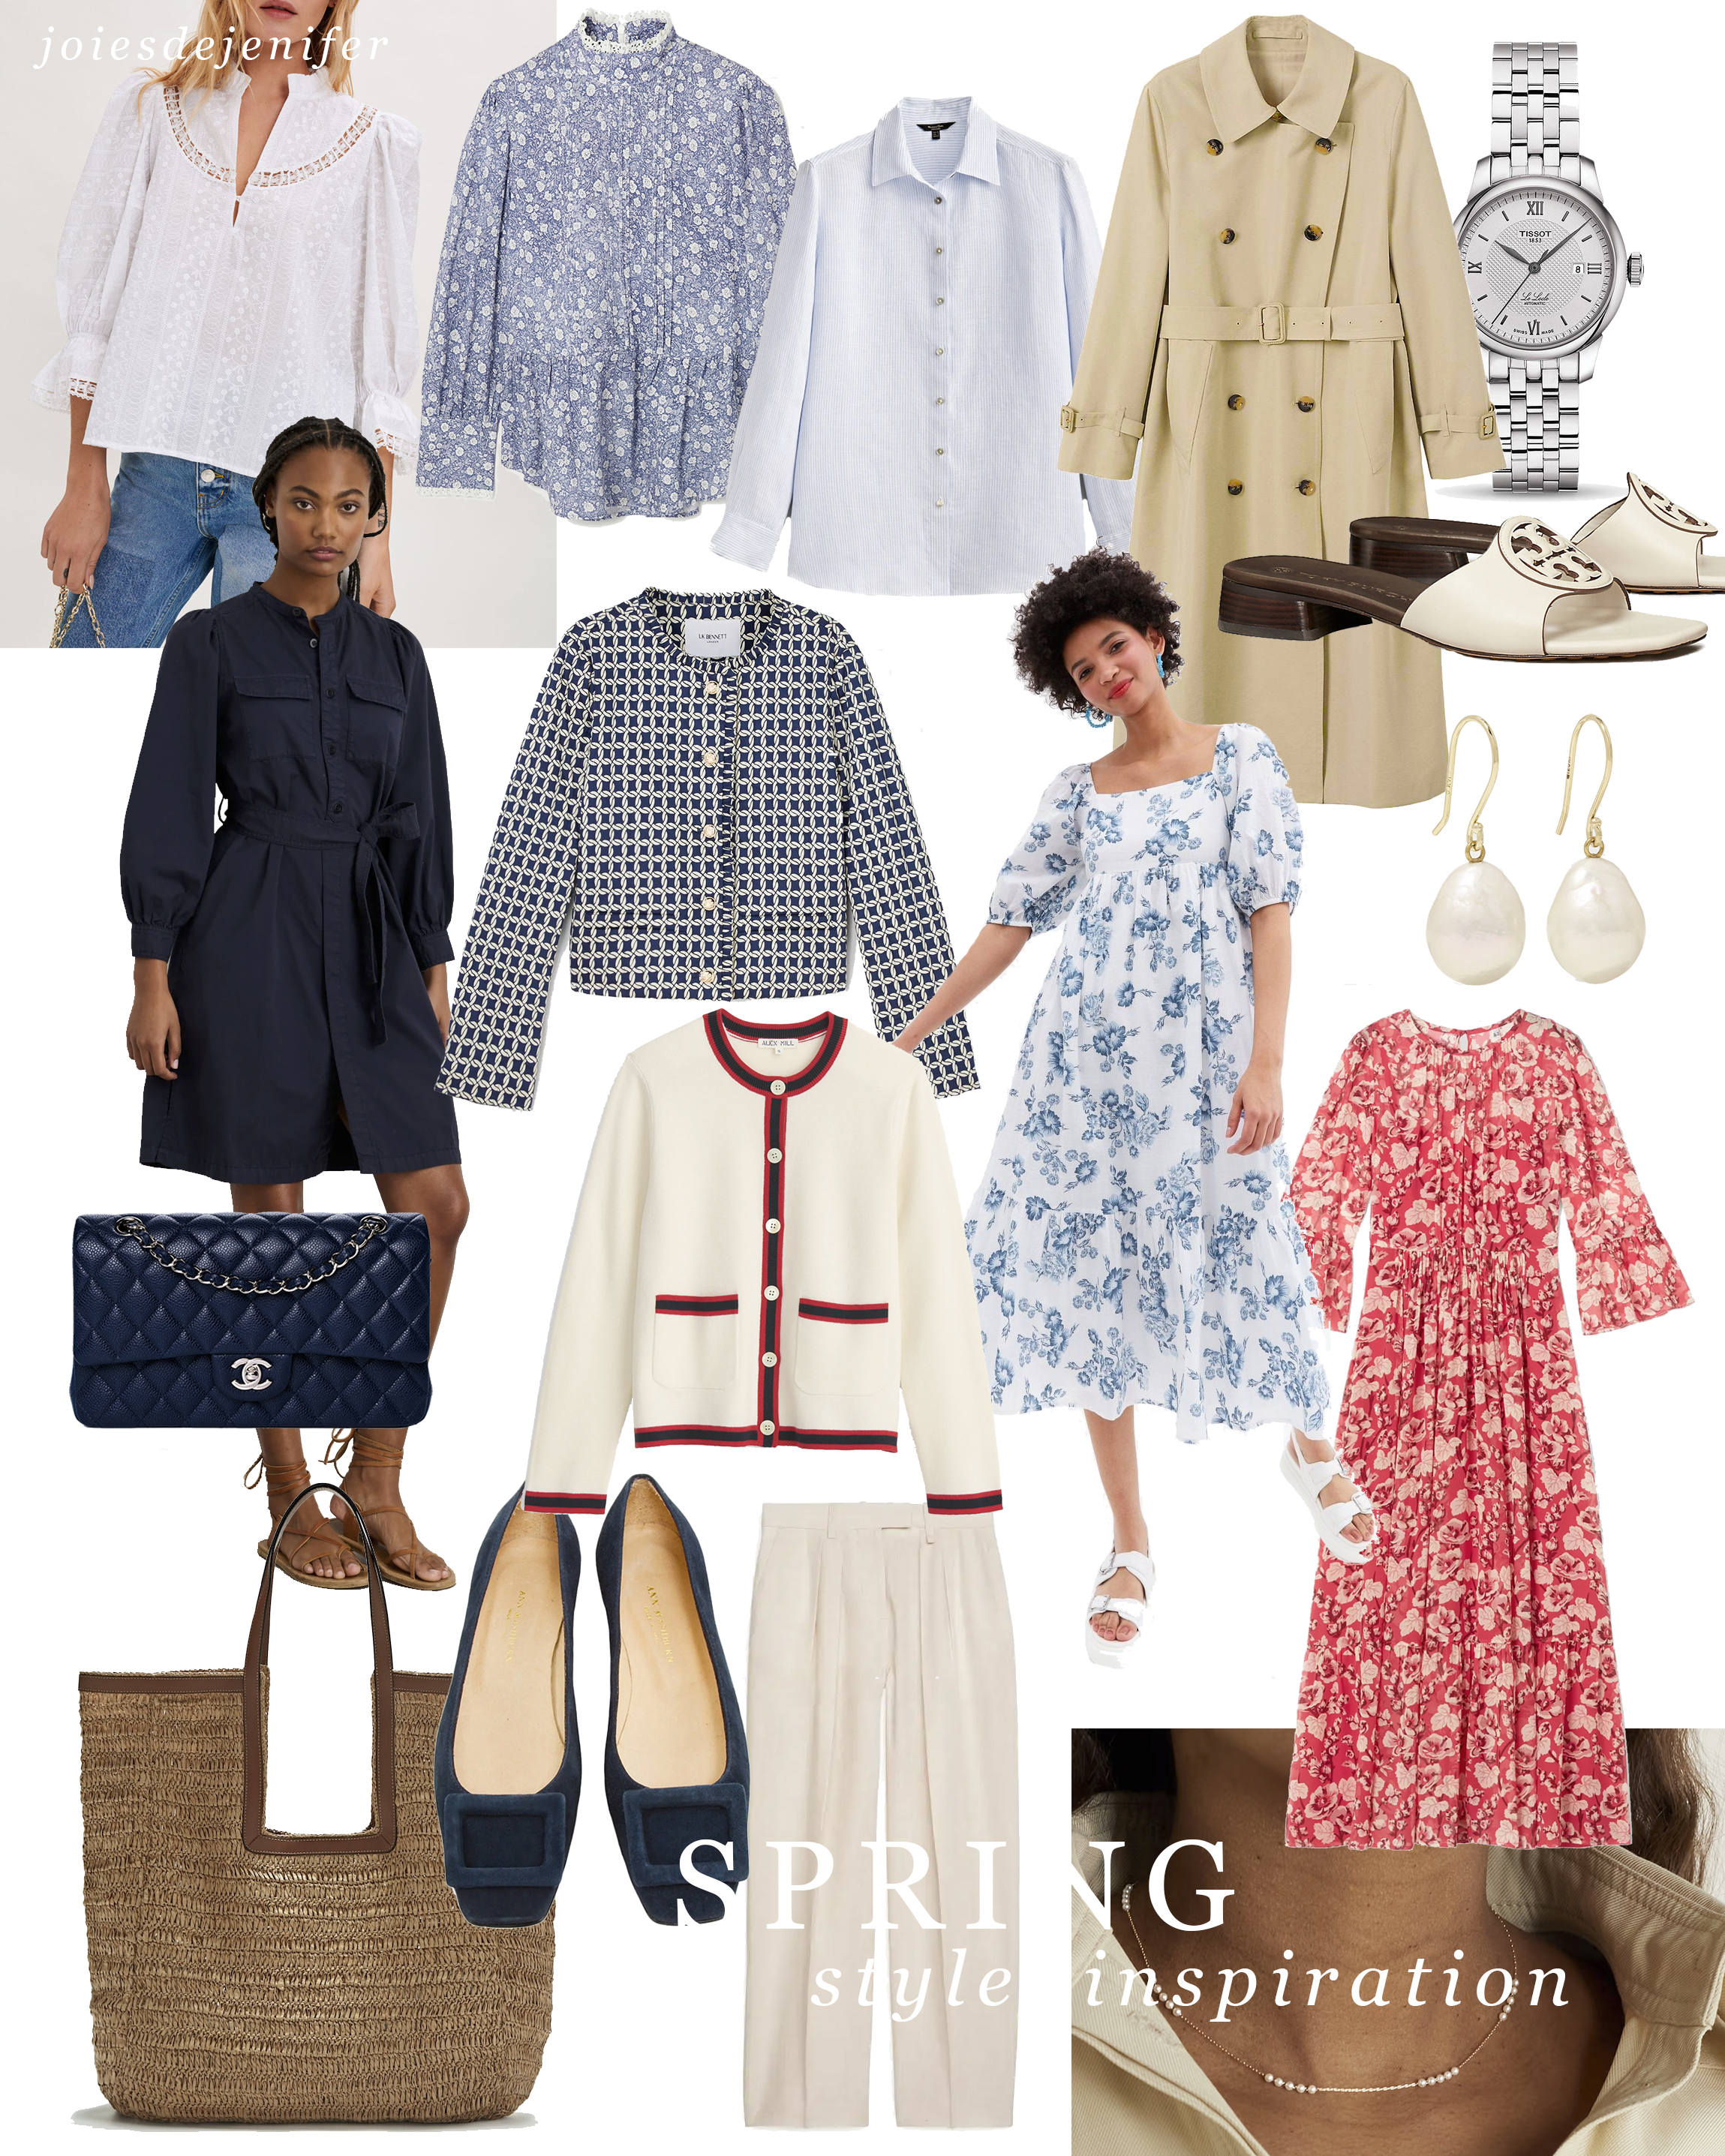 Backpack outfit spring 2022  Spring outfits, Backpack outfit, Fashion